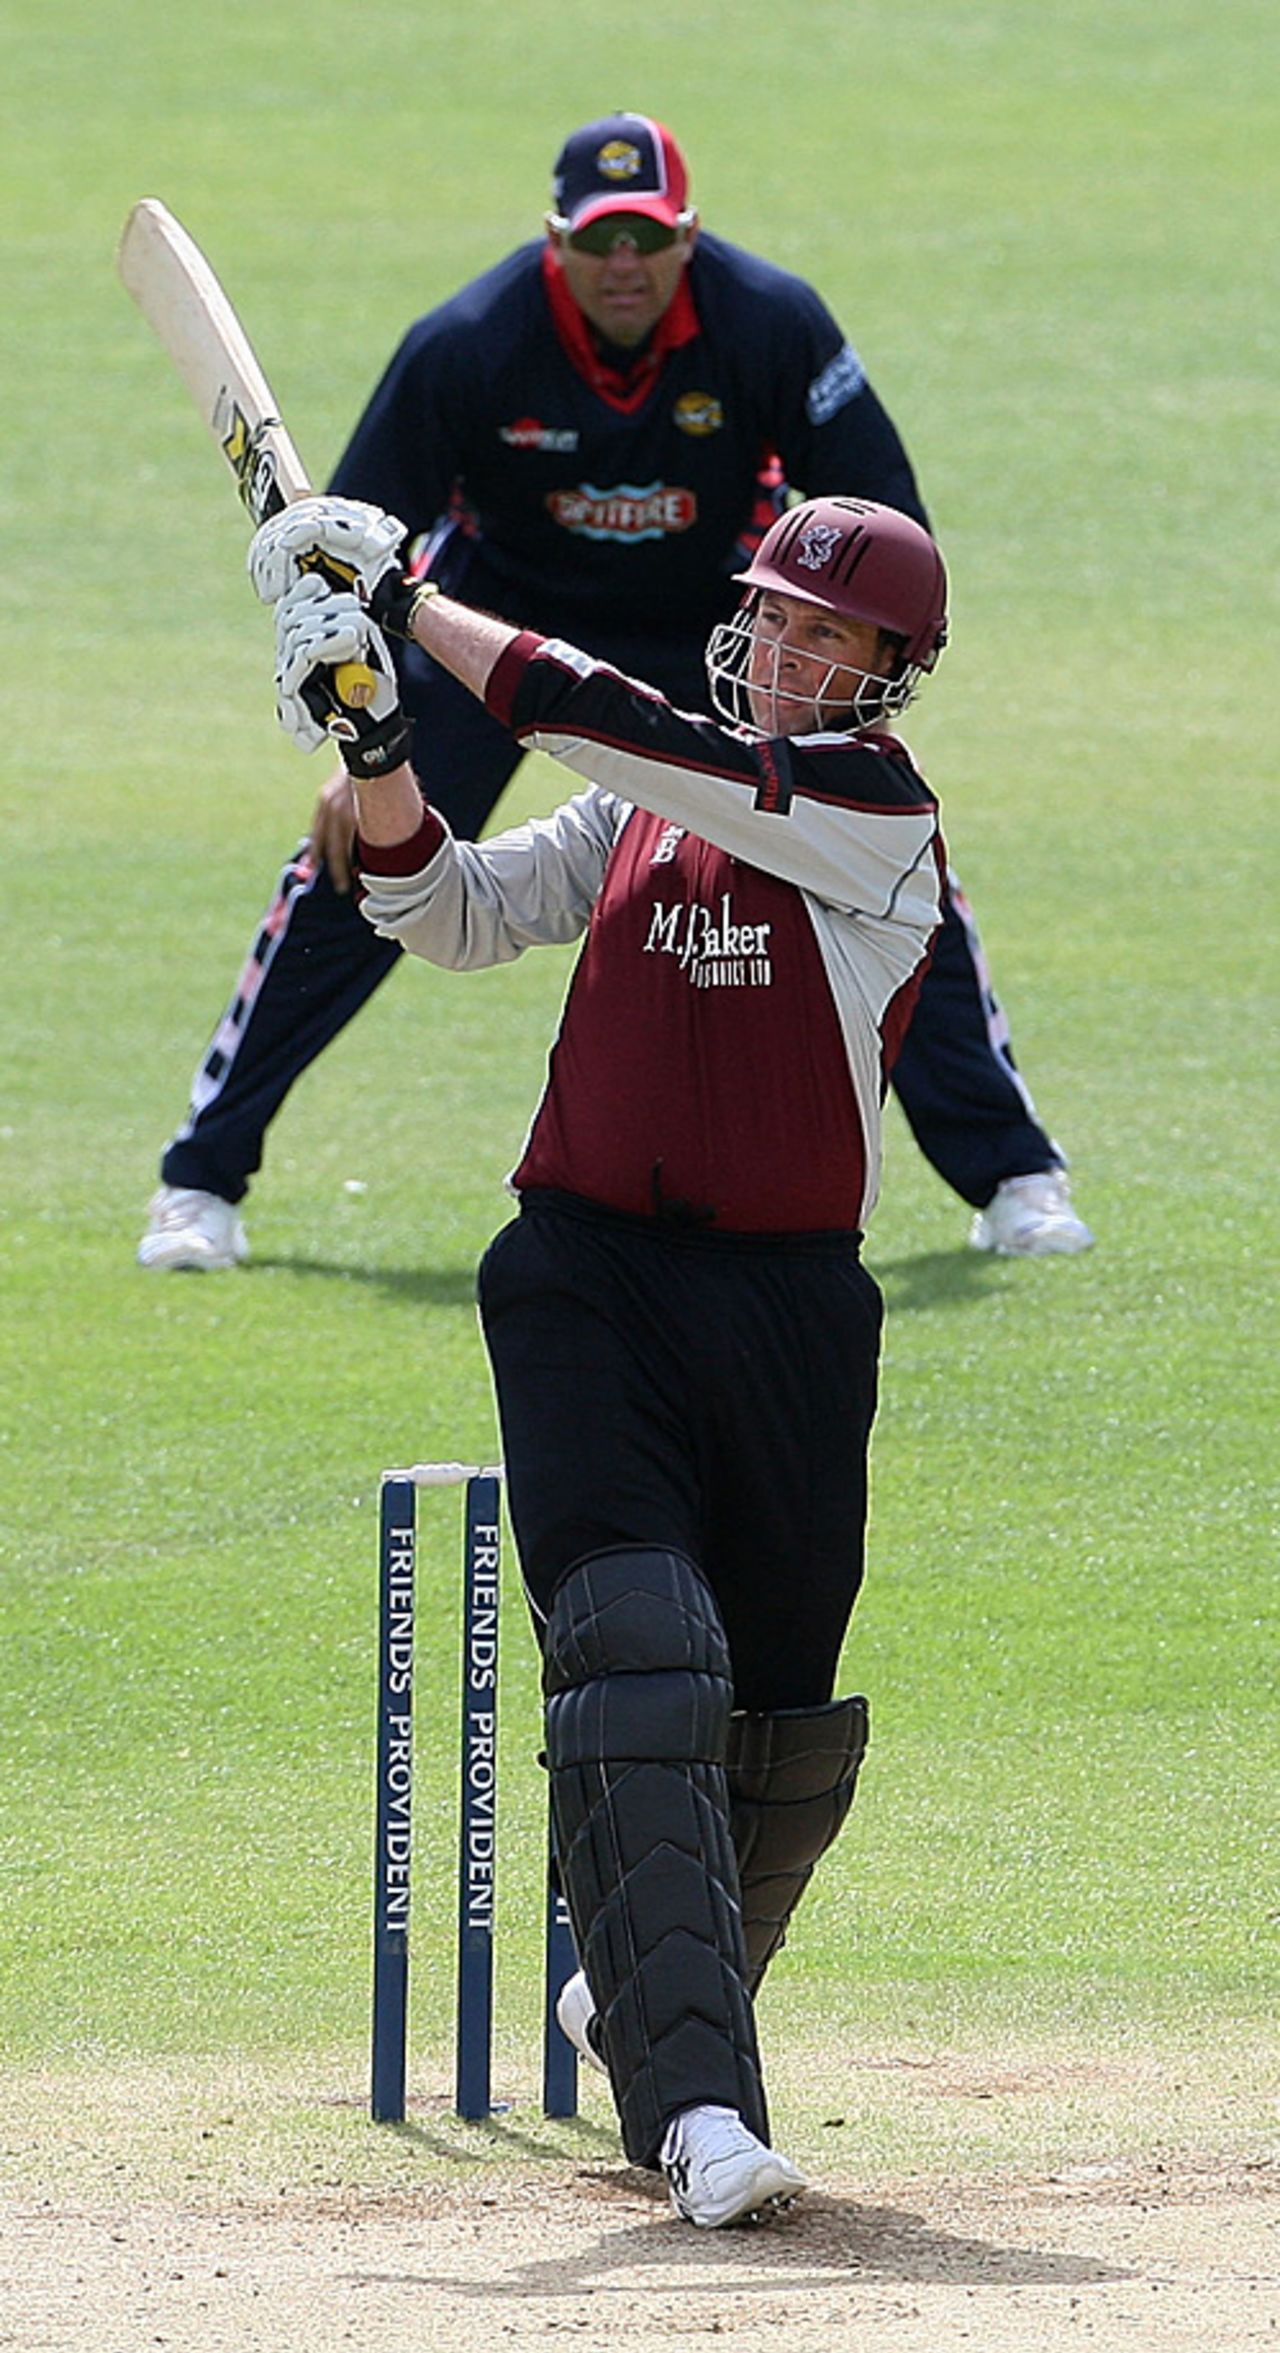 Marcus Trescothick heaves one over midwicket, Kent v Somerset, Canterbury, May 16, 2009